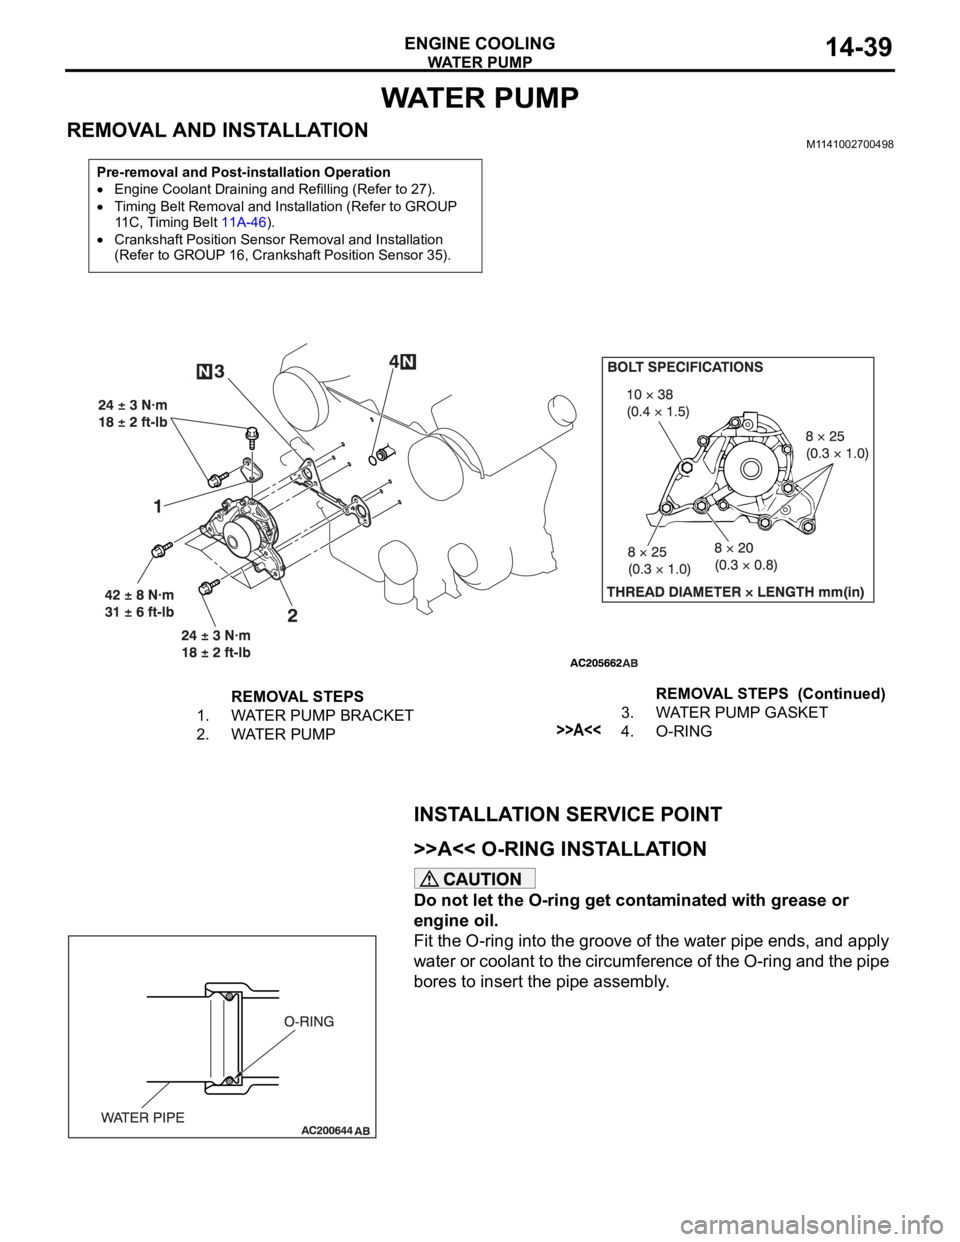 MITSUBISHI 380 2005  Workshop Manual WATE R   P U M P
ENGINE COOLING14-39
WAT E R   P U M P
REMOVAL AND INSTALLATIONM1141002700498
INSTALLATION SERVICE POINT
.
>>A<< O-RING INSTALLATION
Do not let the O-ring get contaminated with grease 